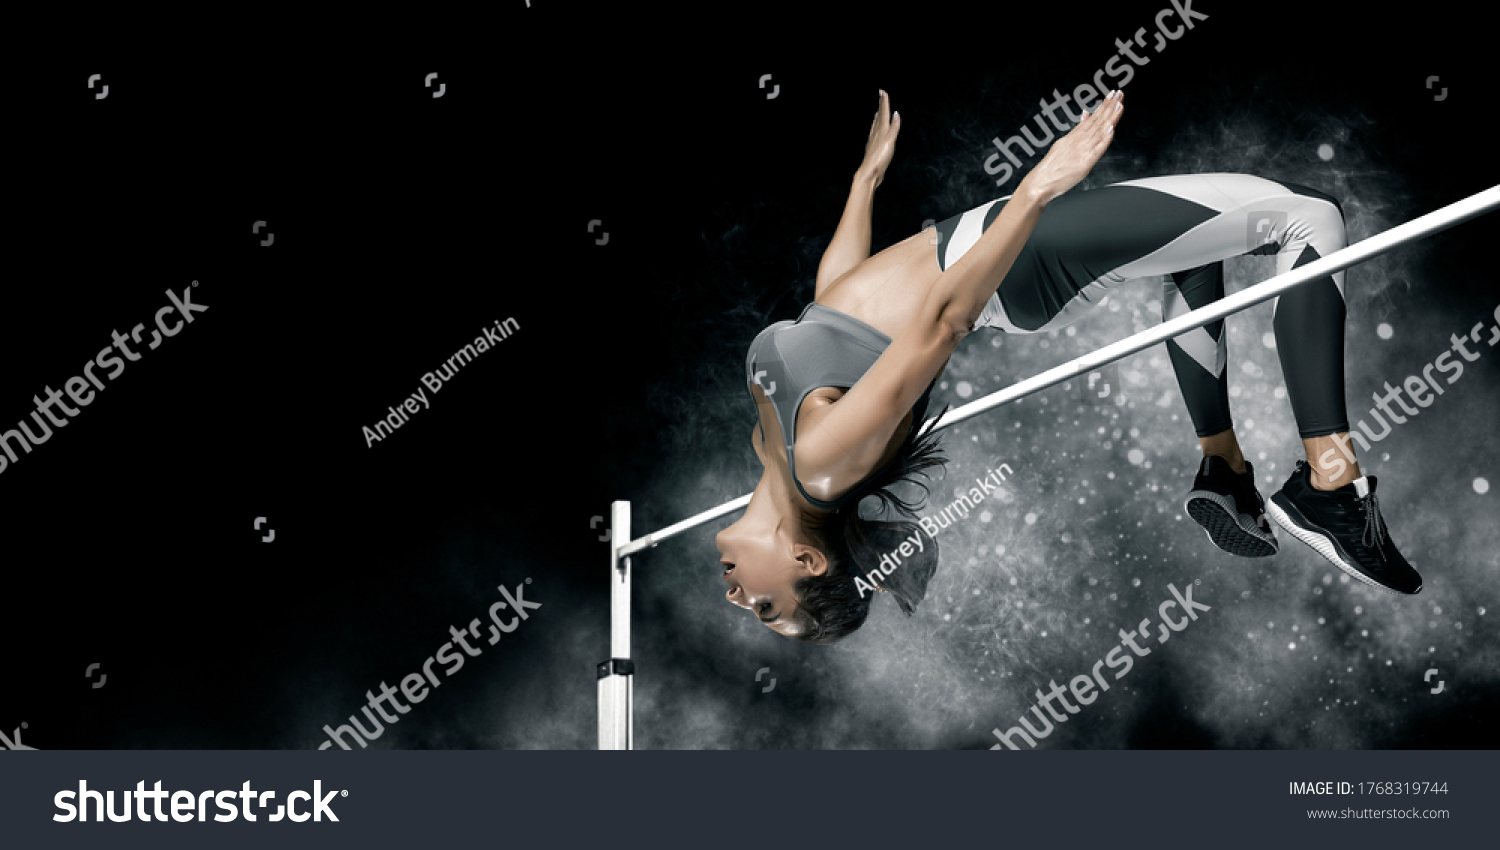 Woman in action of high jump on smoke background. Sports banner. Horizontal copy space background #1768319744